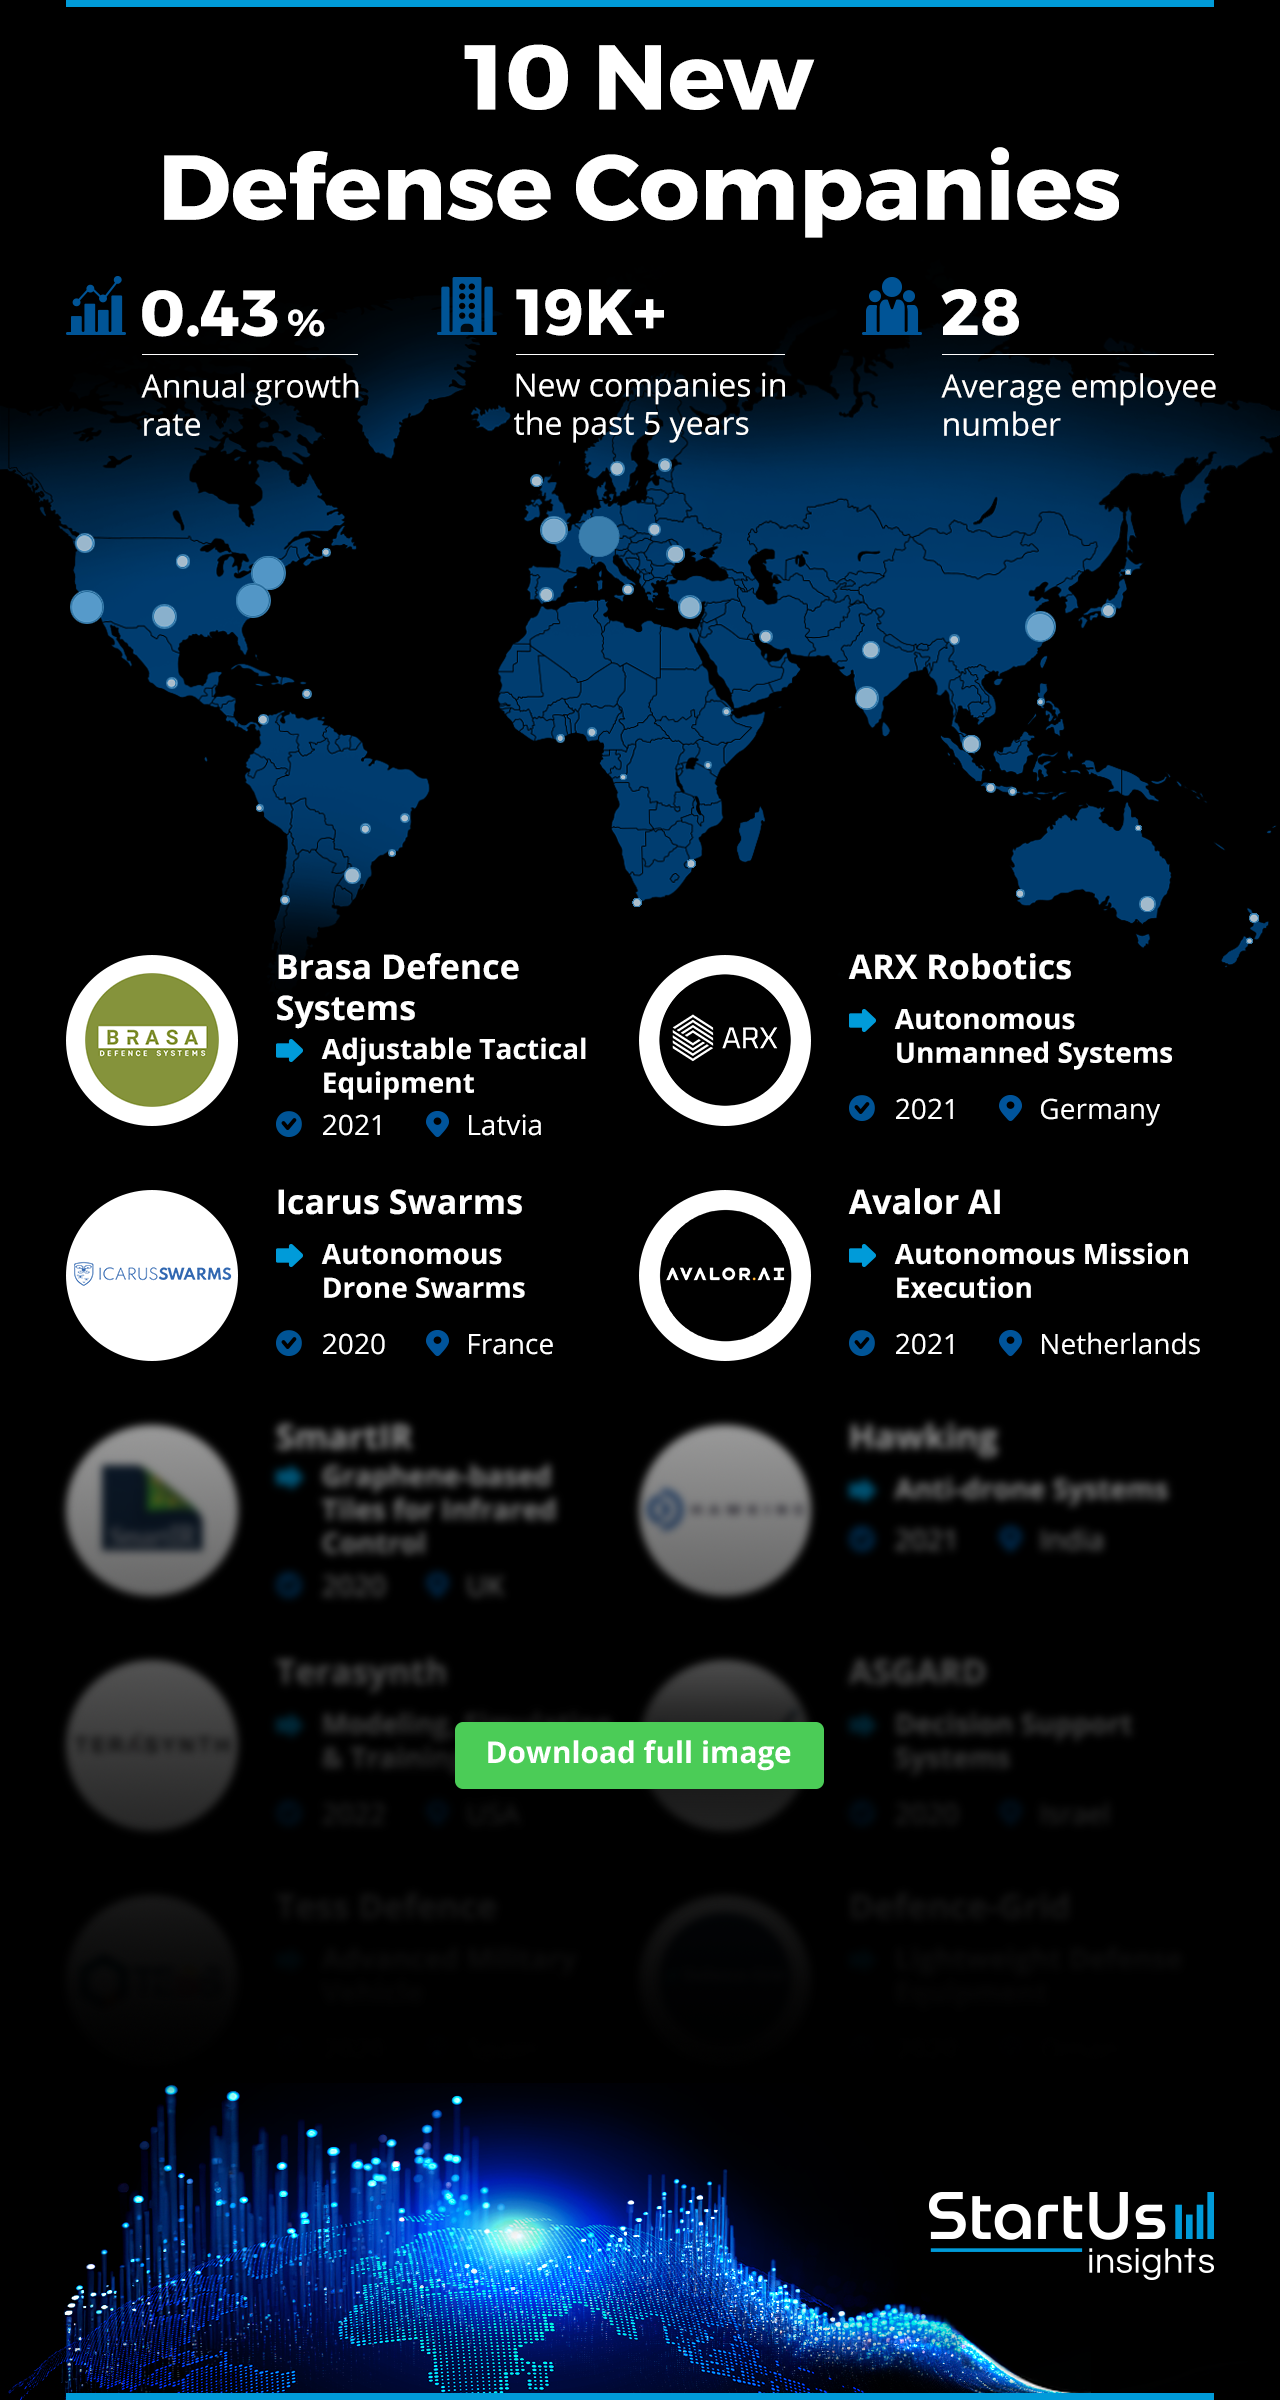 New-Defence-Companies-Logos-Blurred-StartUs-Insights-noresize